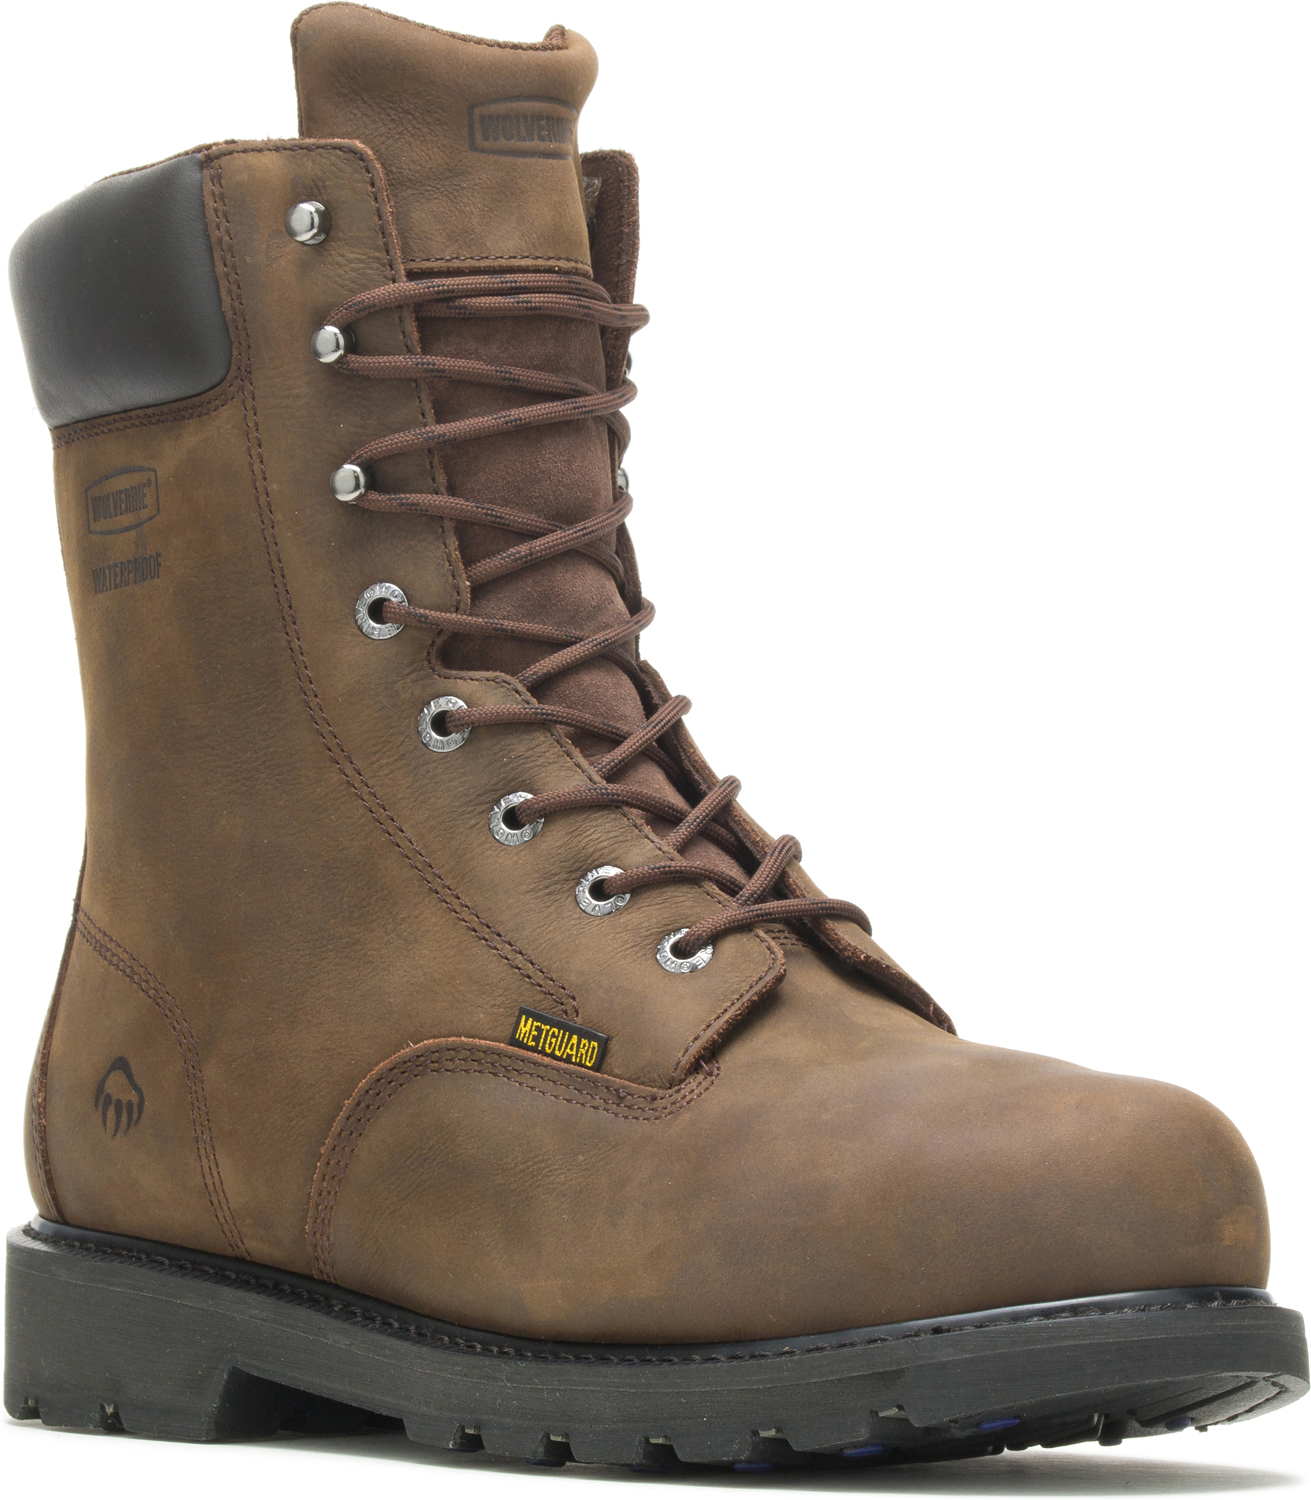 8 SIZE 13M COLOR Details about   WOLVERINE MEN'S CLINT WATERPROOF STEEL TOE WORK BOOT BROWN 